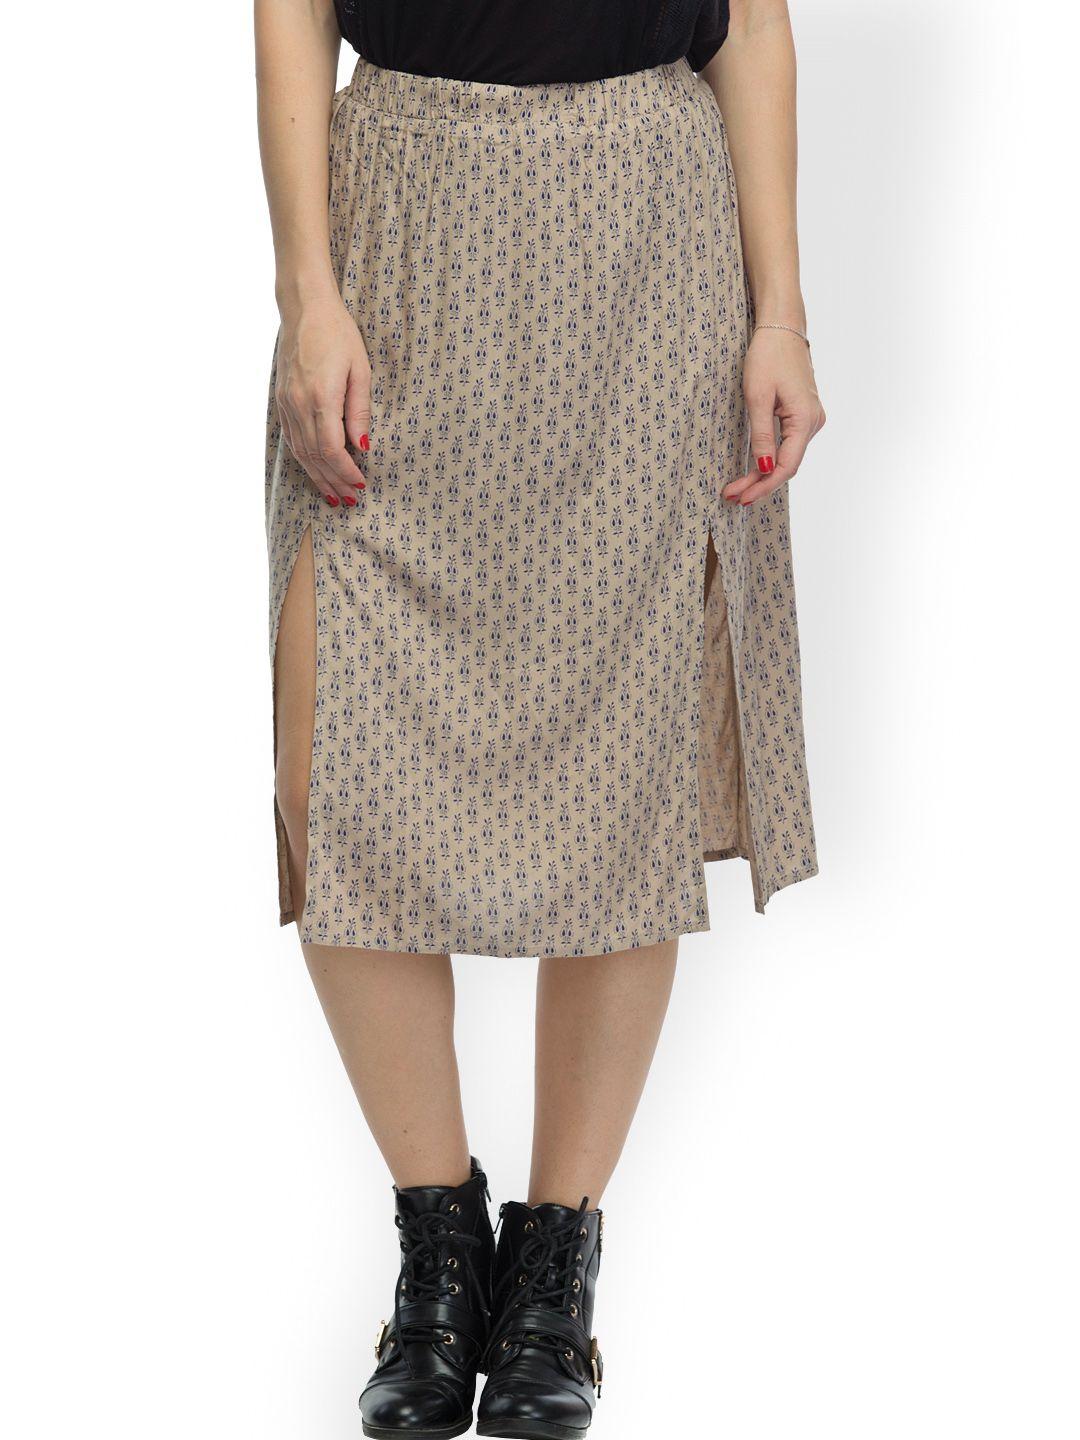 oxolloxo-beige-printed-a-line-skirt